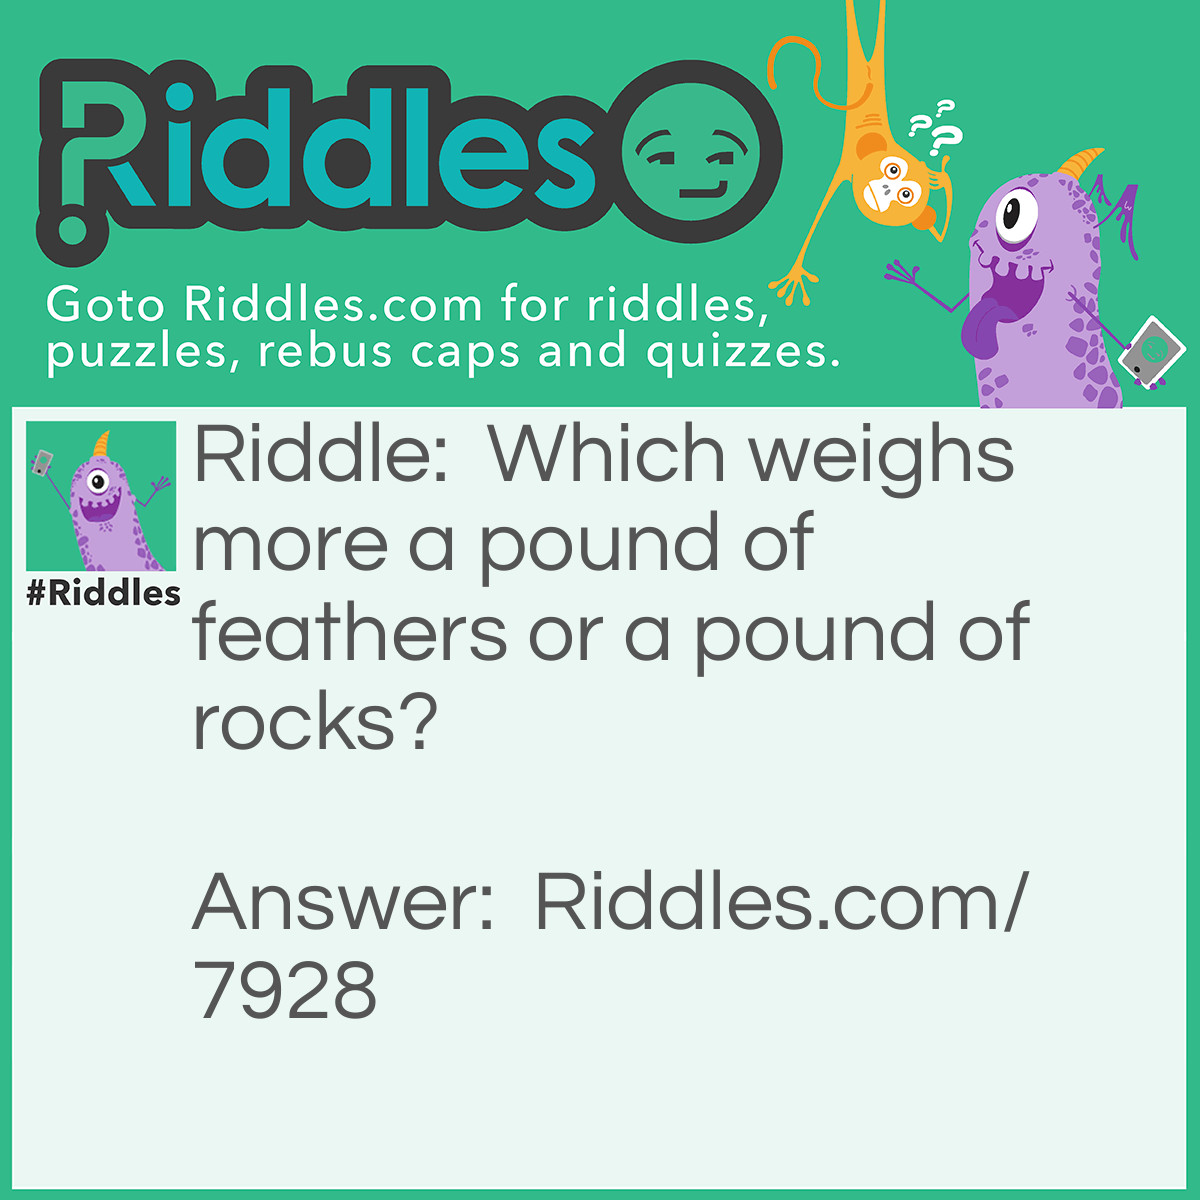 Riddle: Which weighs more a pound of feathers or a pound of rocks? Answer: They’re both 1 pound.